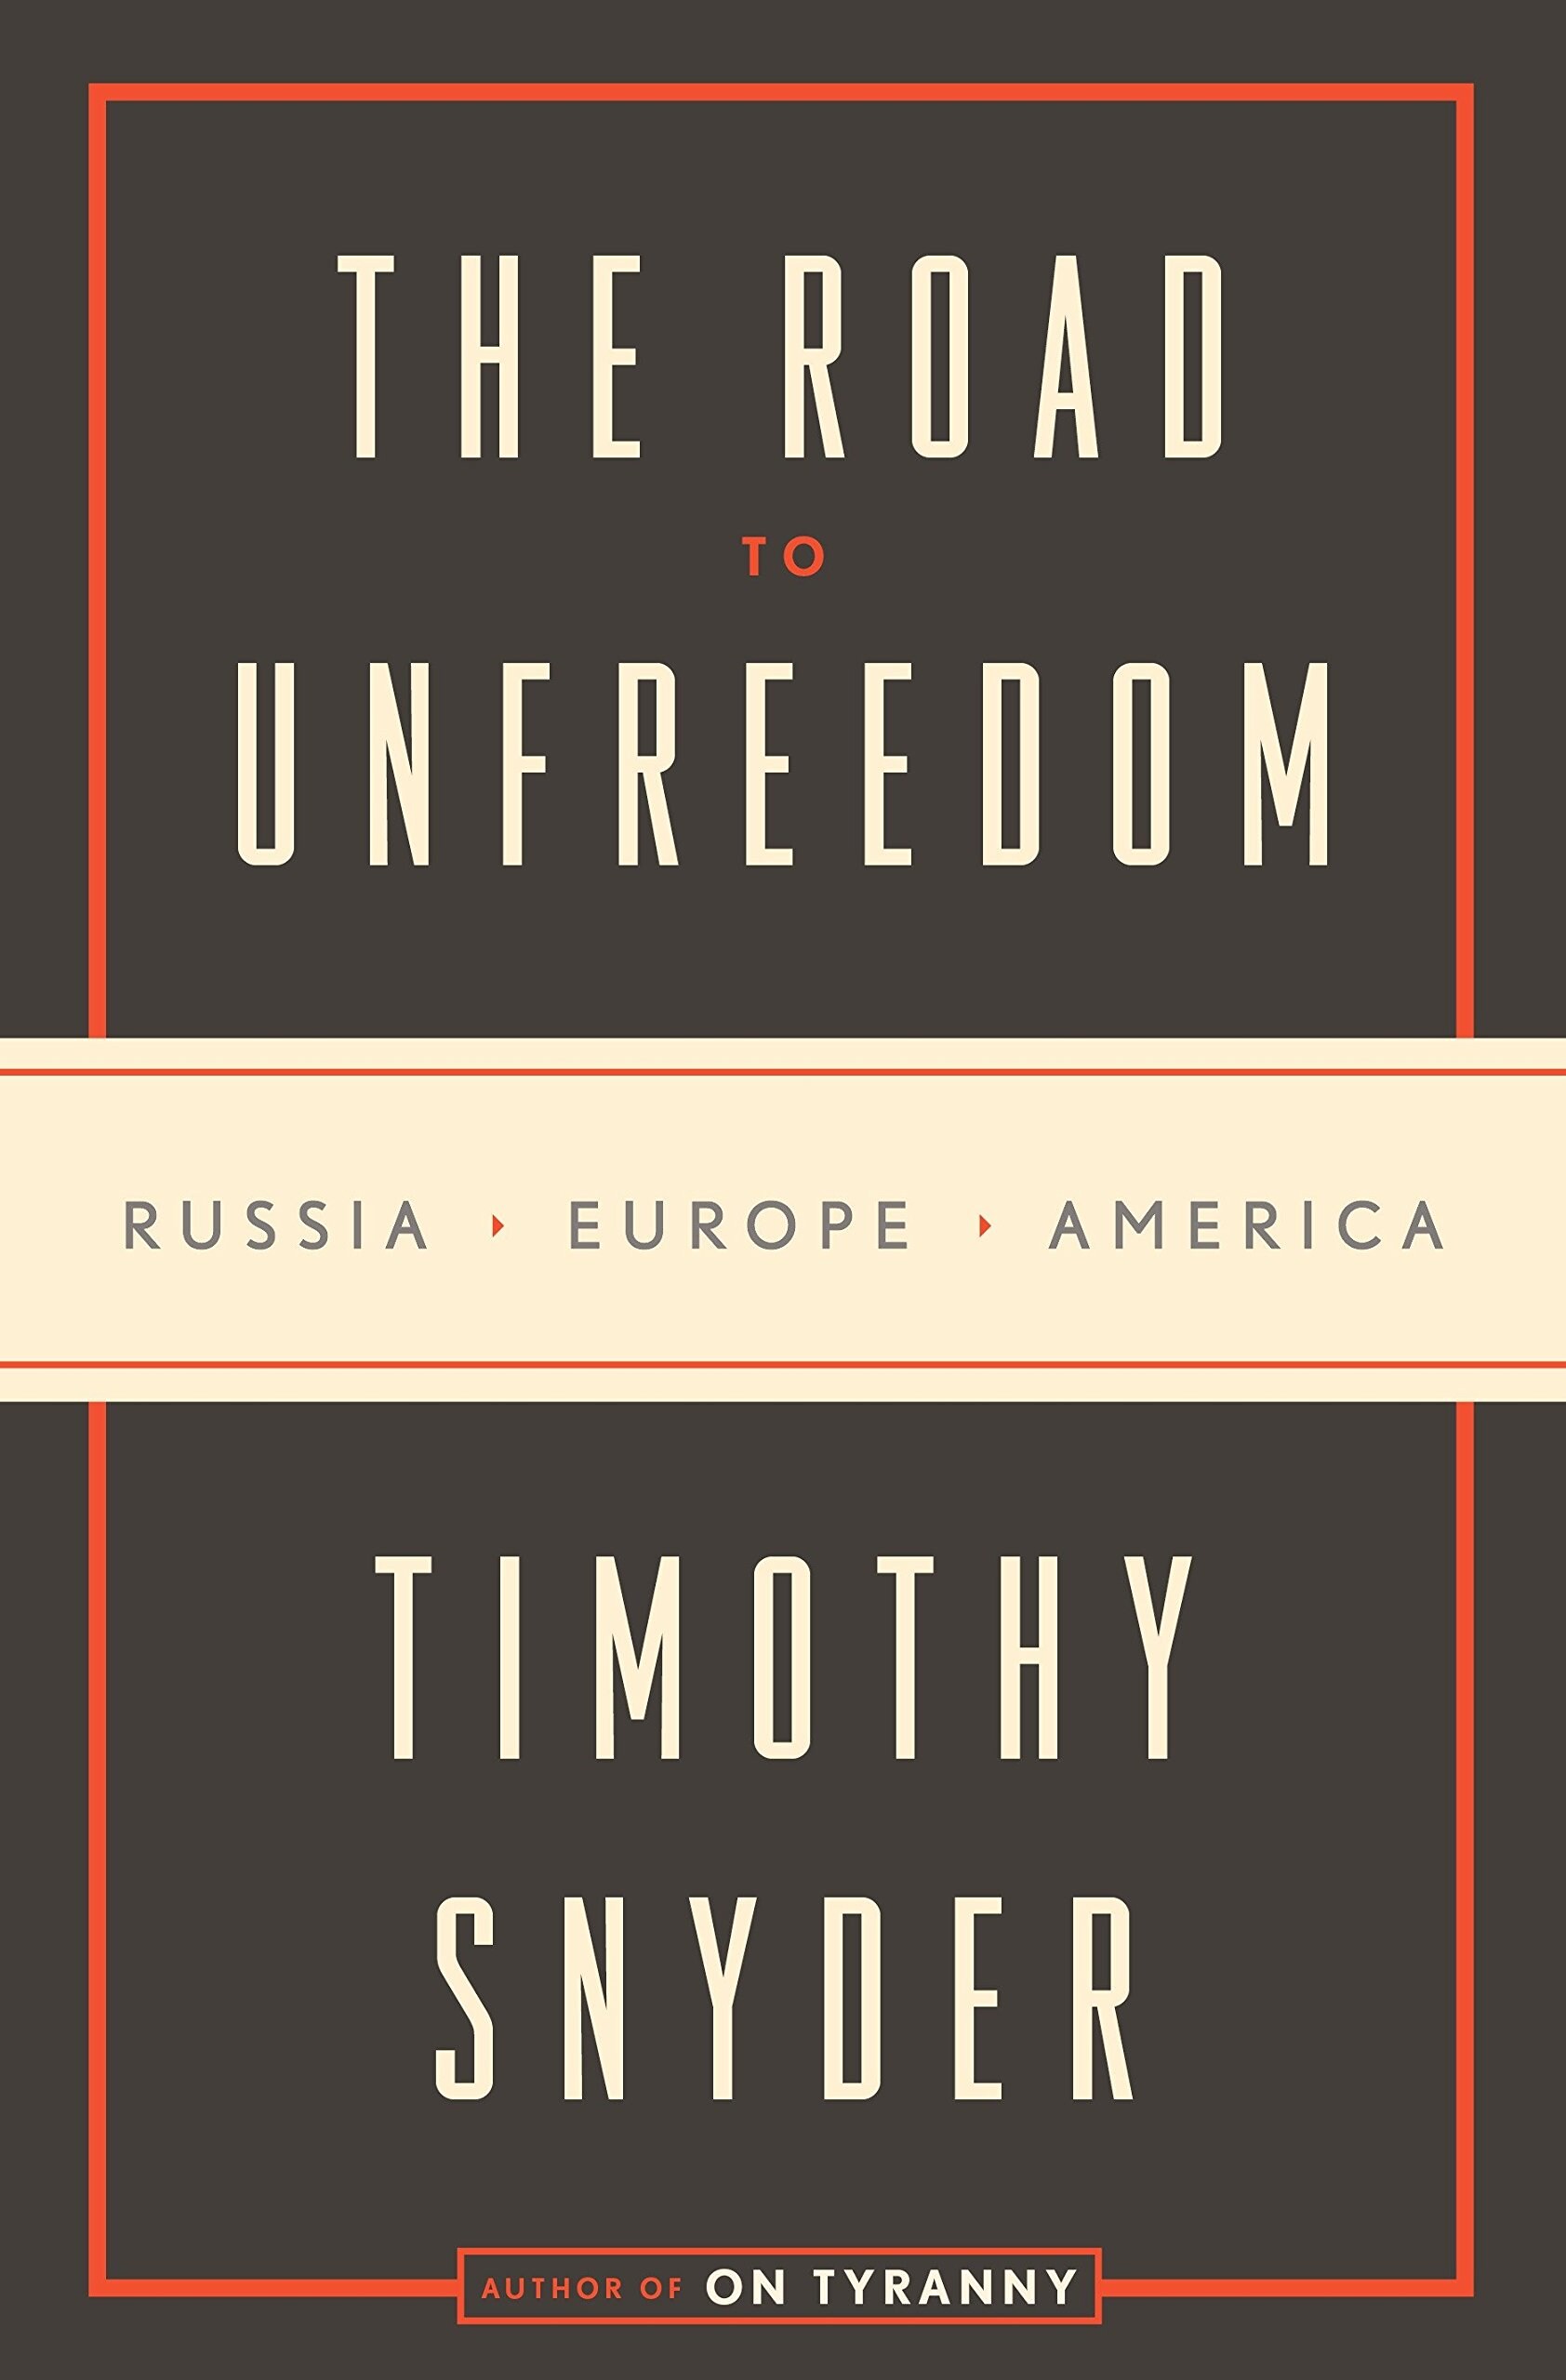 4. Timothy Snyder - The Road to Unfreedom